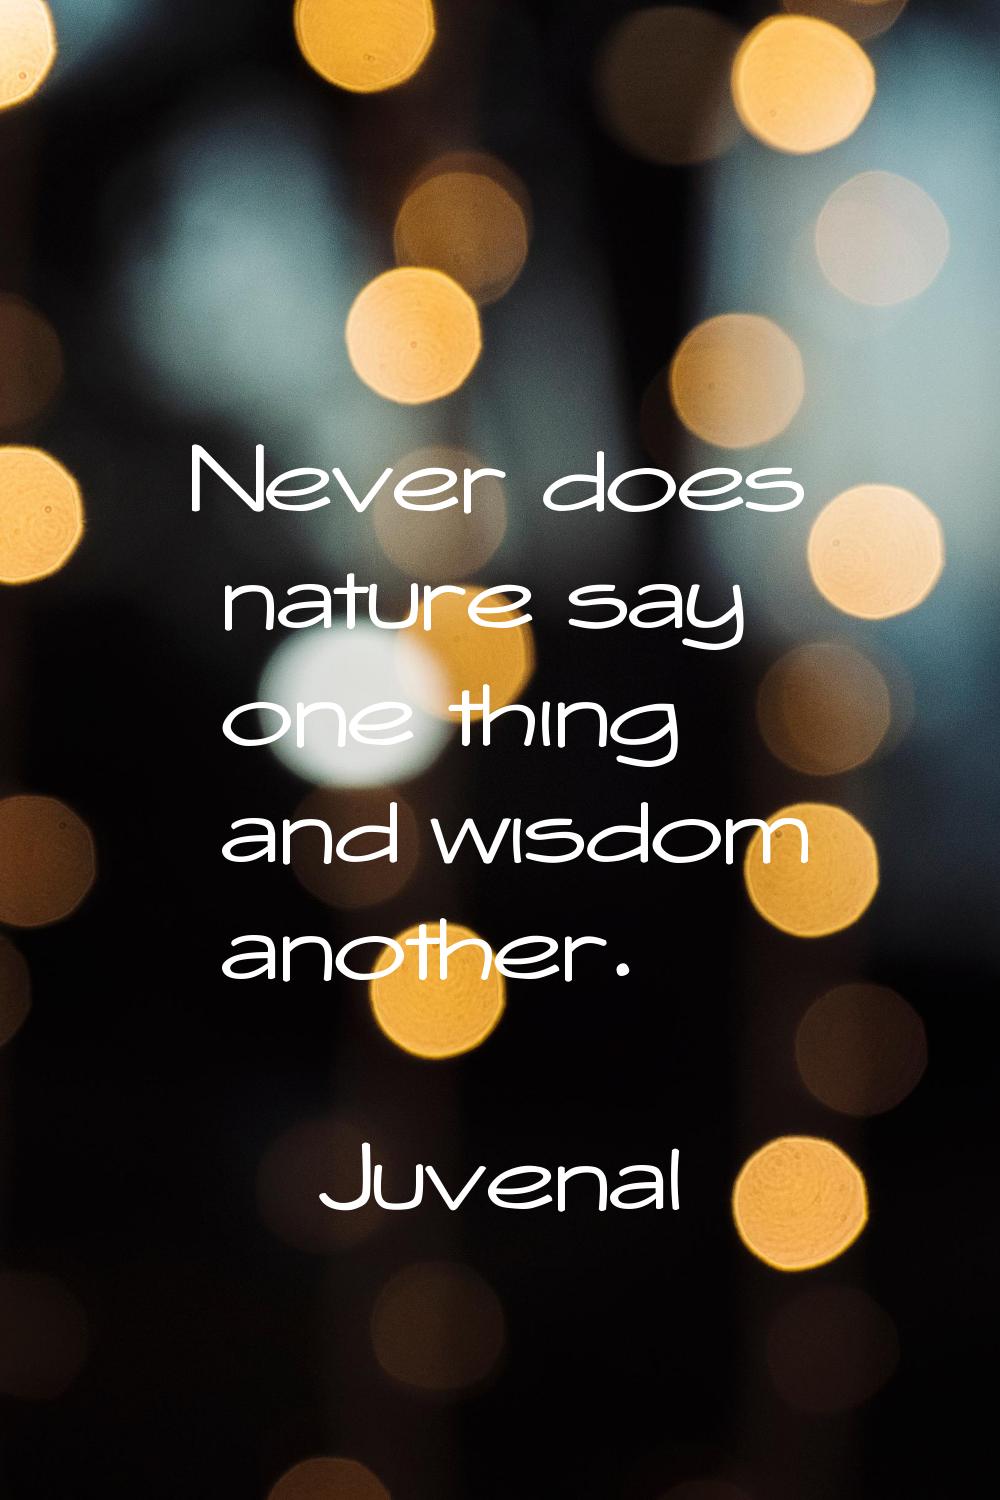 Never does nature say one thing and wisdom another.